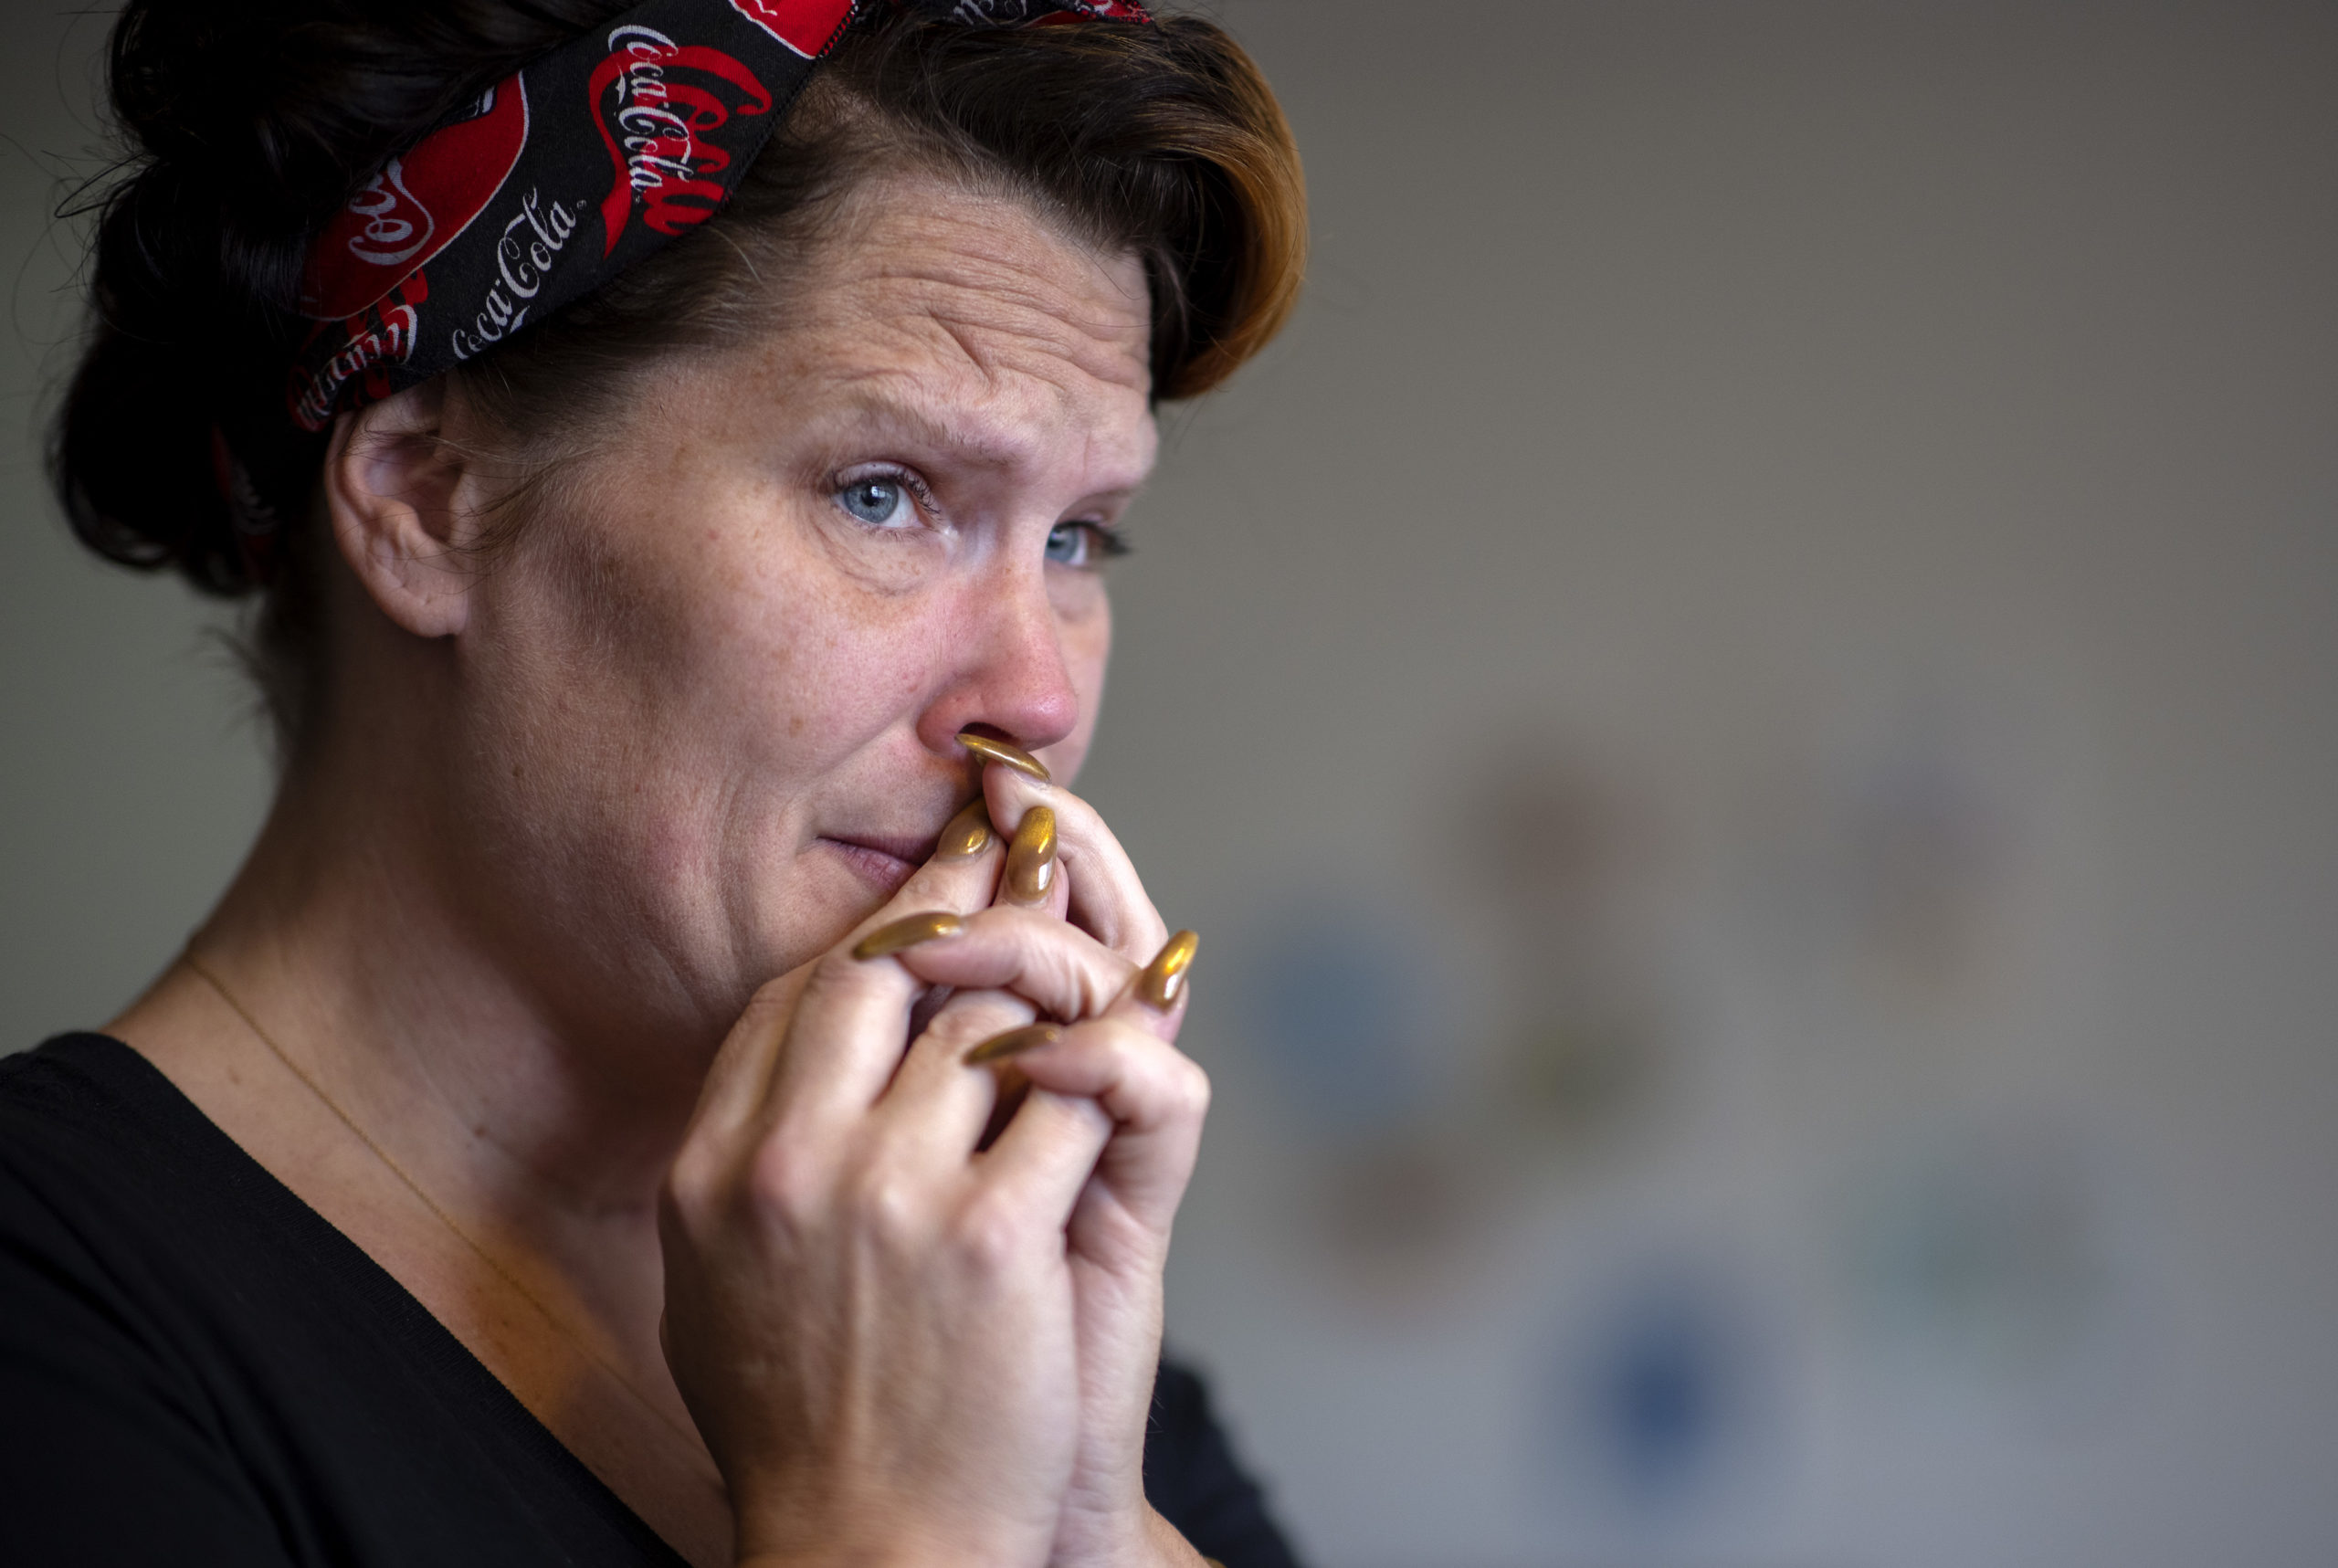 A side profile shot of Courteney Ross, where she stands left wearing a Coca Cola bandana headband and a black shirt. She folds her hands over her lips, wearing gold nail polish